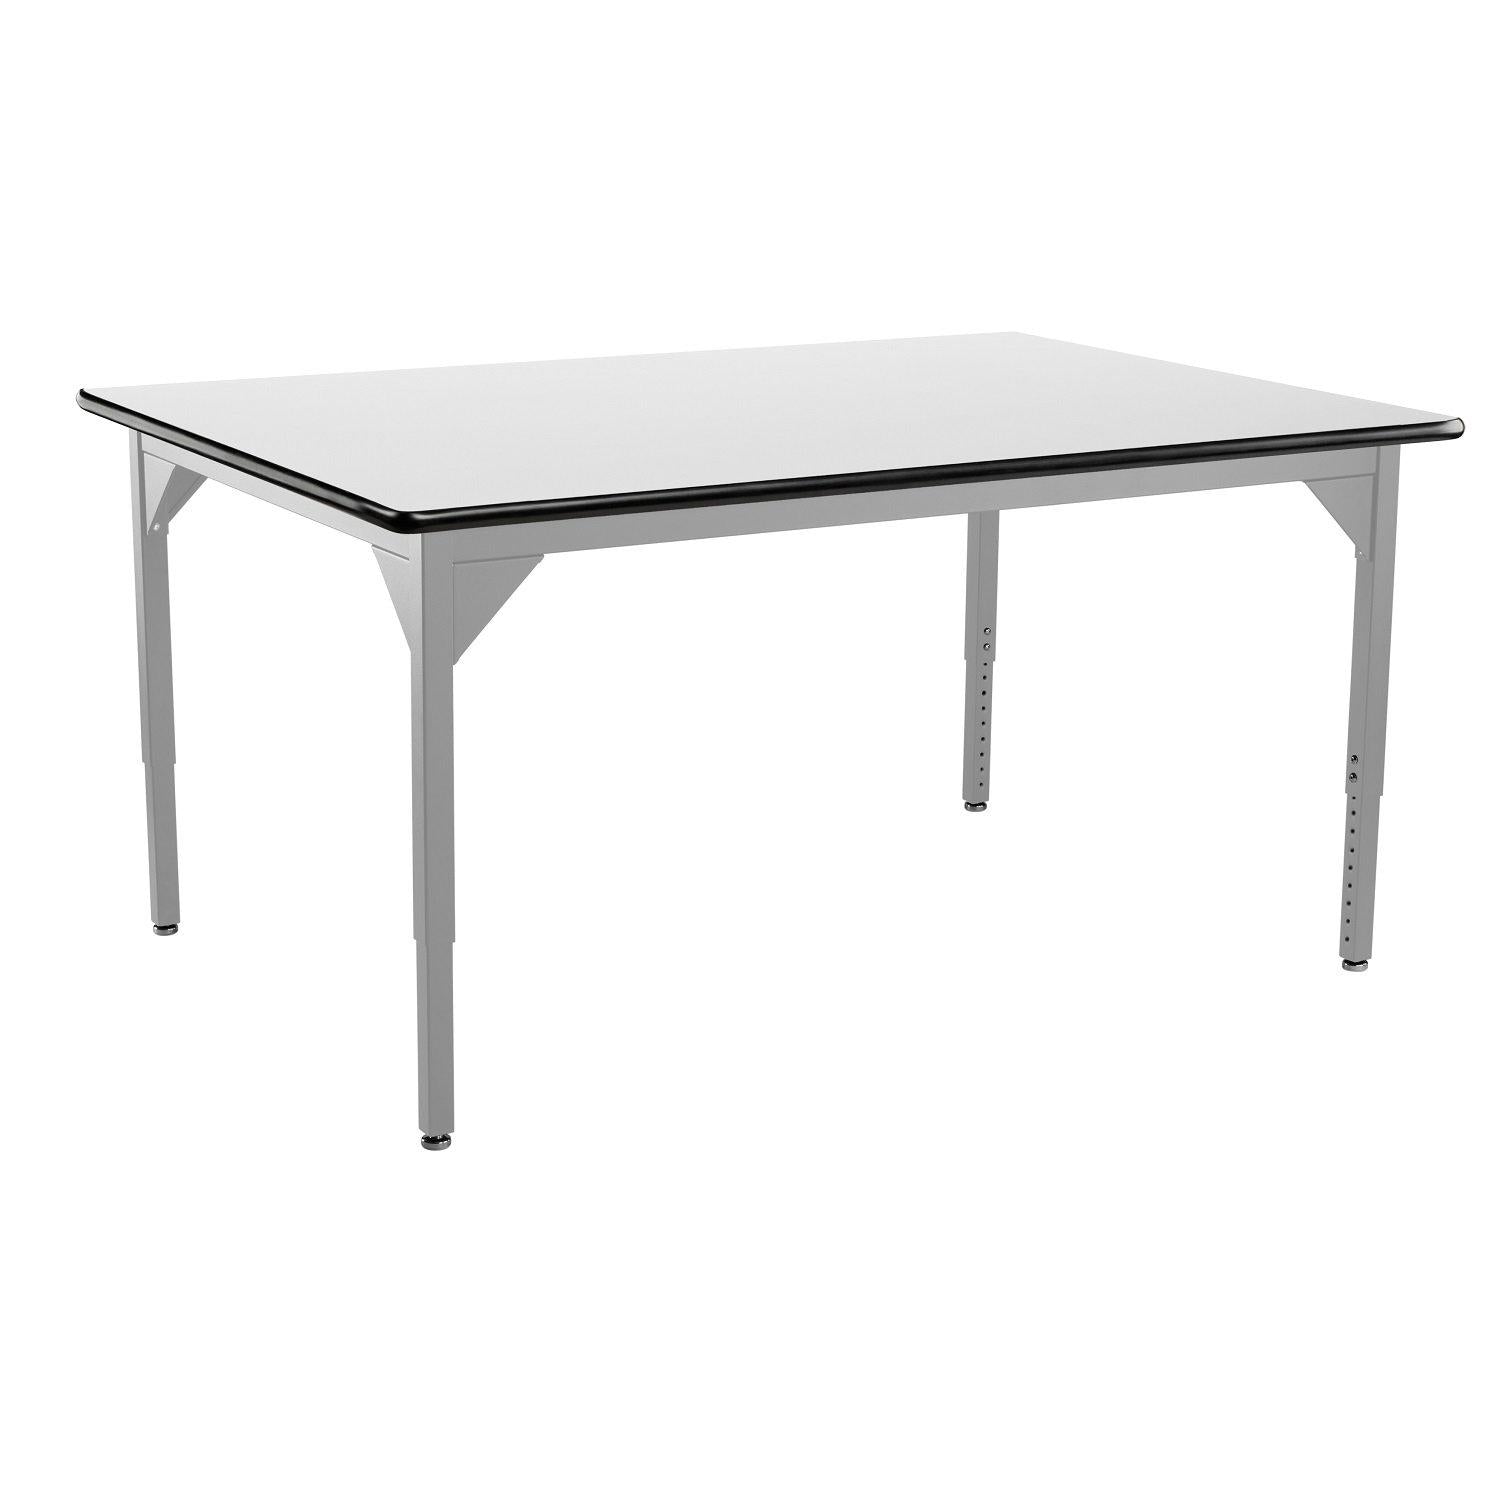 Heavy-Duty Height-Adjustable Utility Table, Soft Grey Frame, 48" x 60", Whiteboard High-Pressure Laminate Top